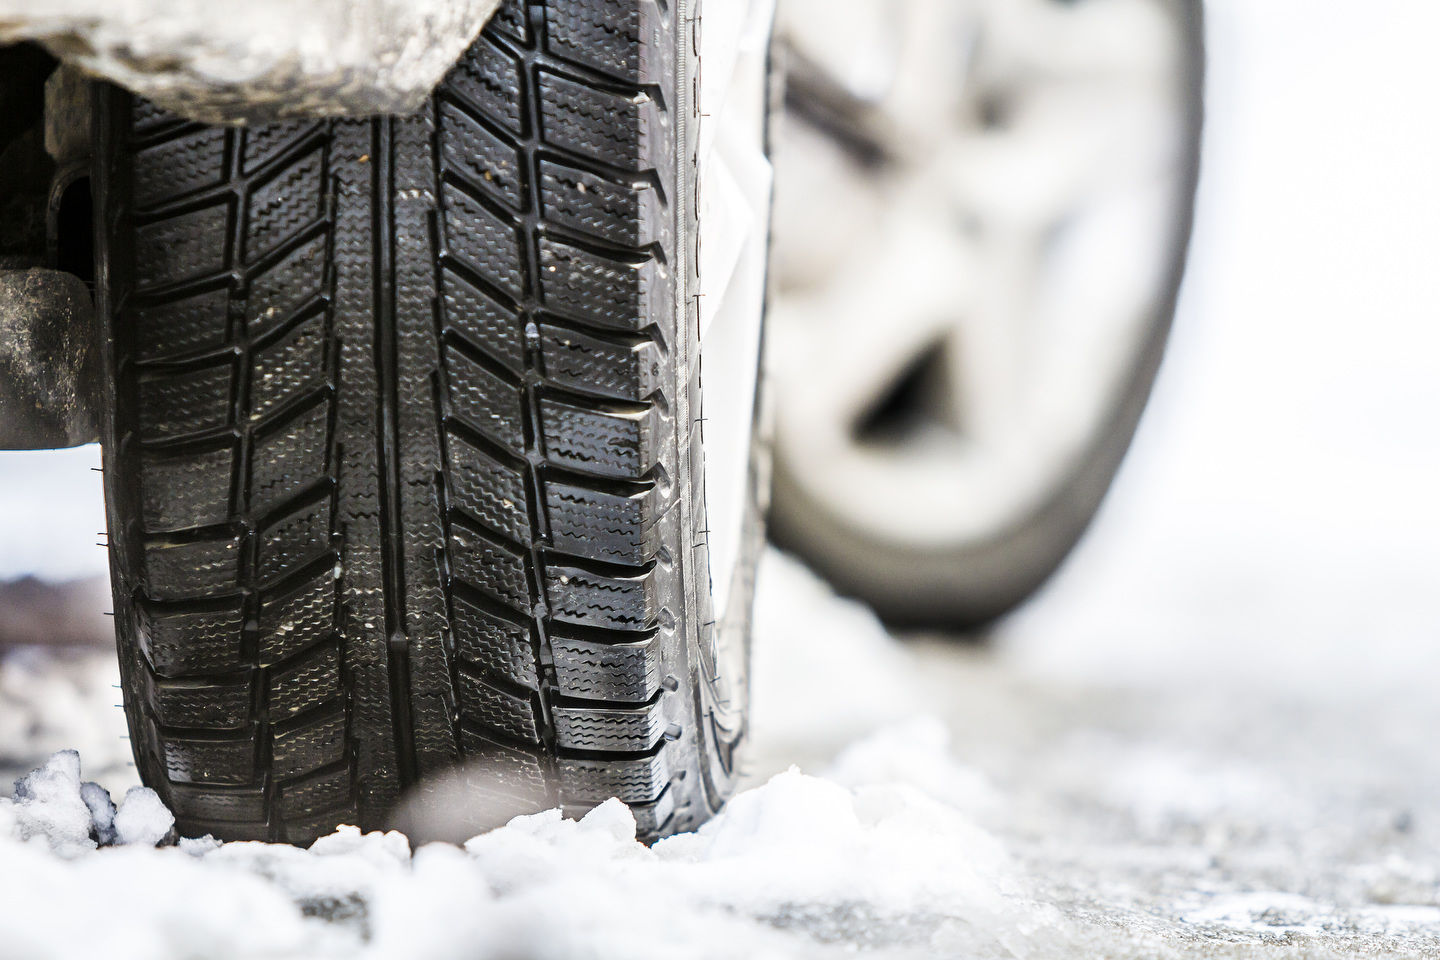 Here are some tips to prepare your vehicle for the arrival of winter